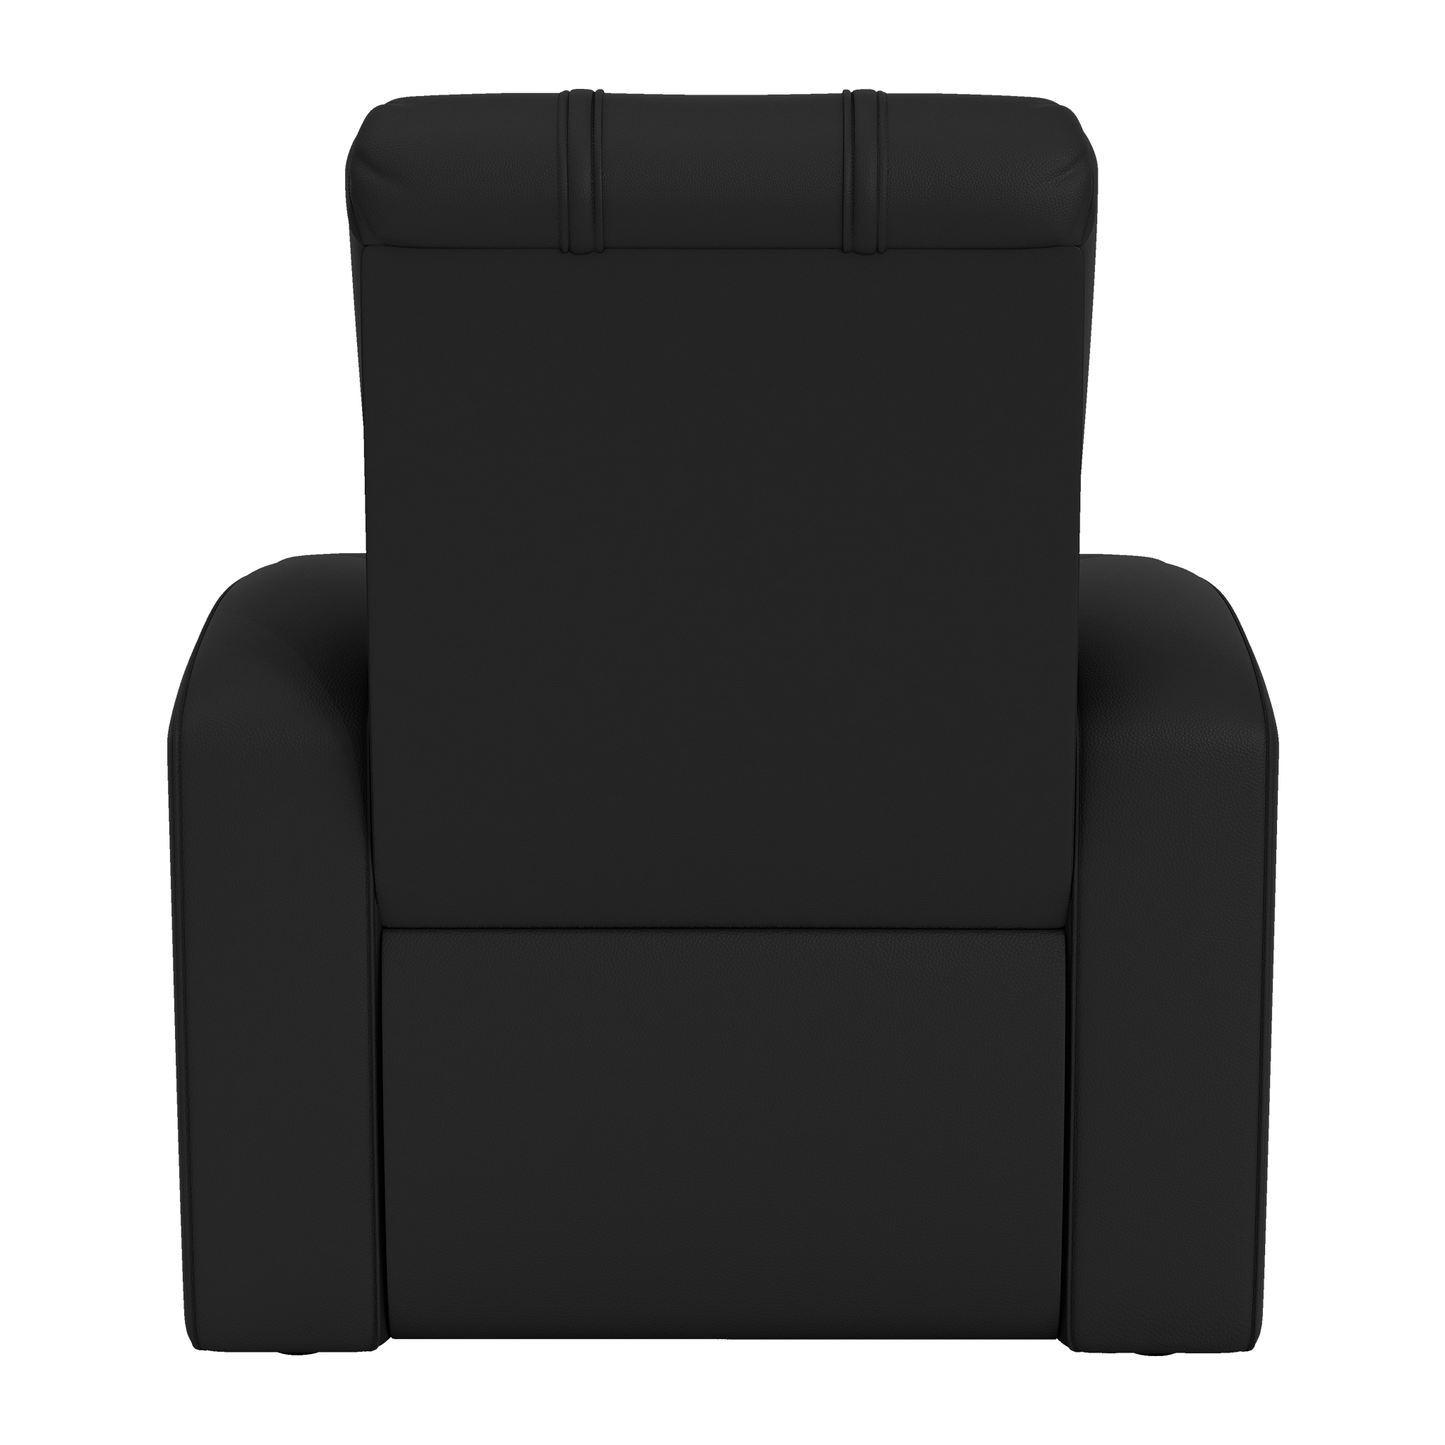 Relax Home Theater Recliner with Boston Red Sox Logo